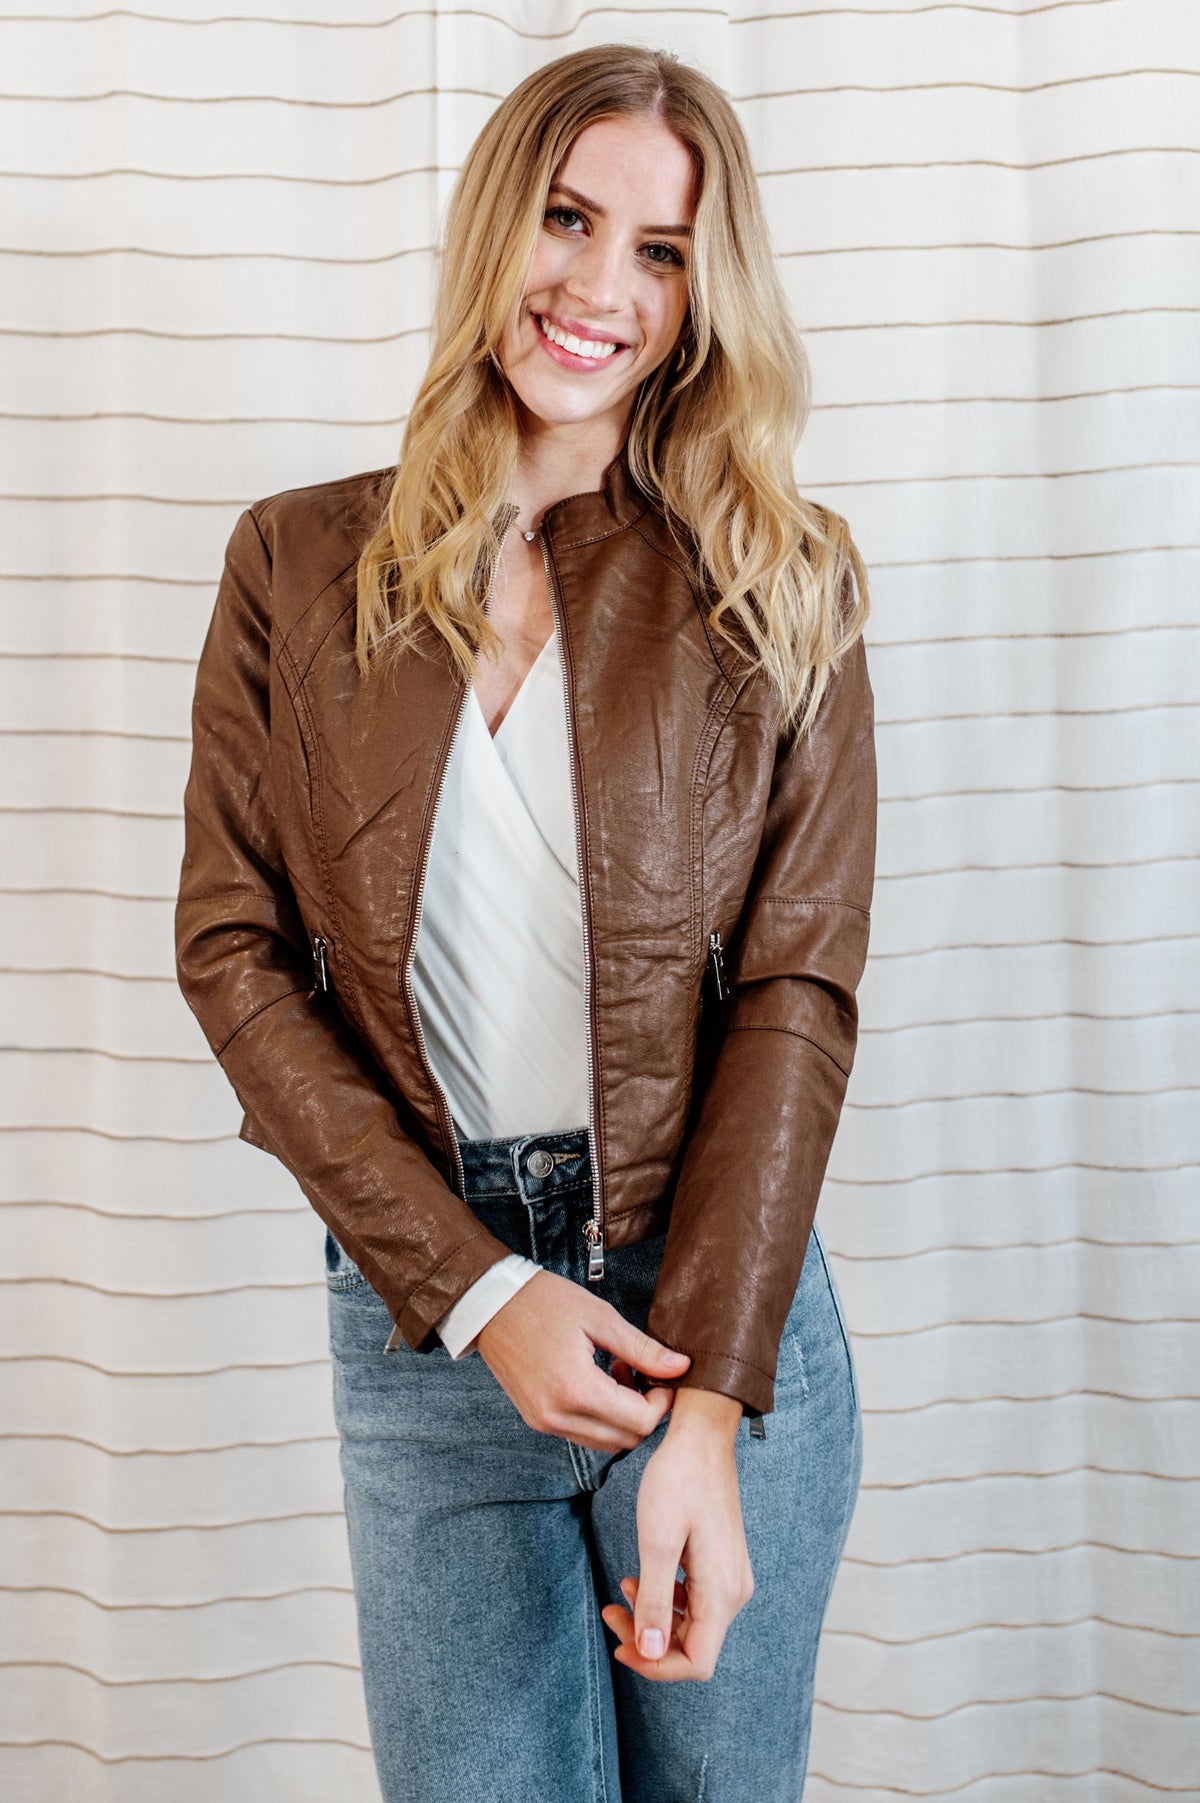 Pictured is a chocolate-brown, vegan faux leather jacket with an outside stitch detailing, floral-lined inside, and zipper detailing on the front, sleeves, and pockets.